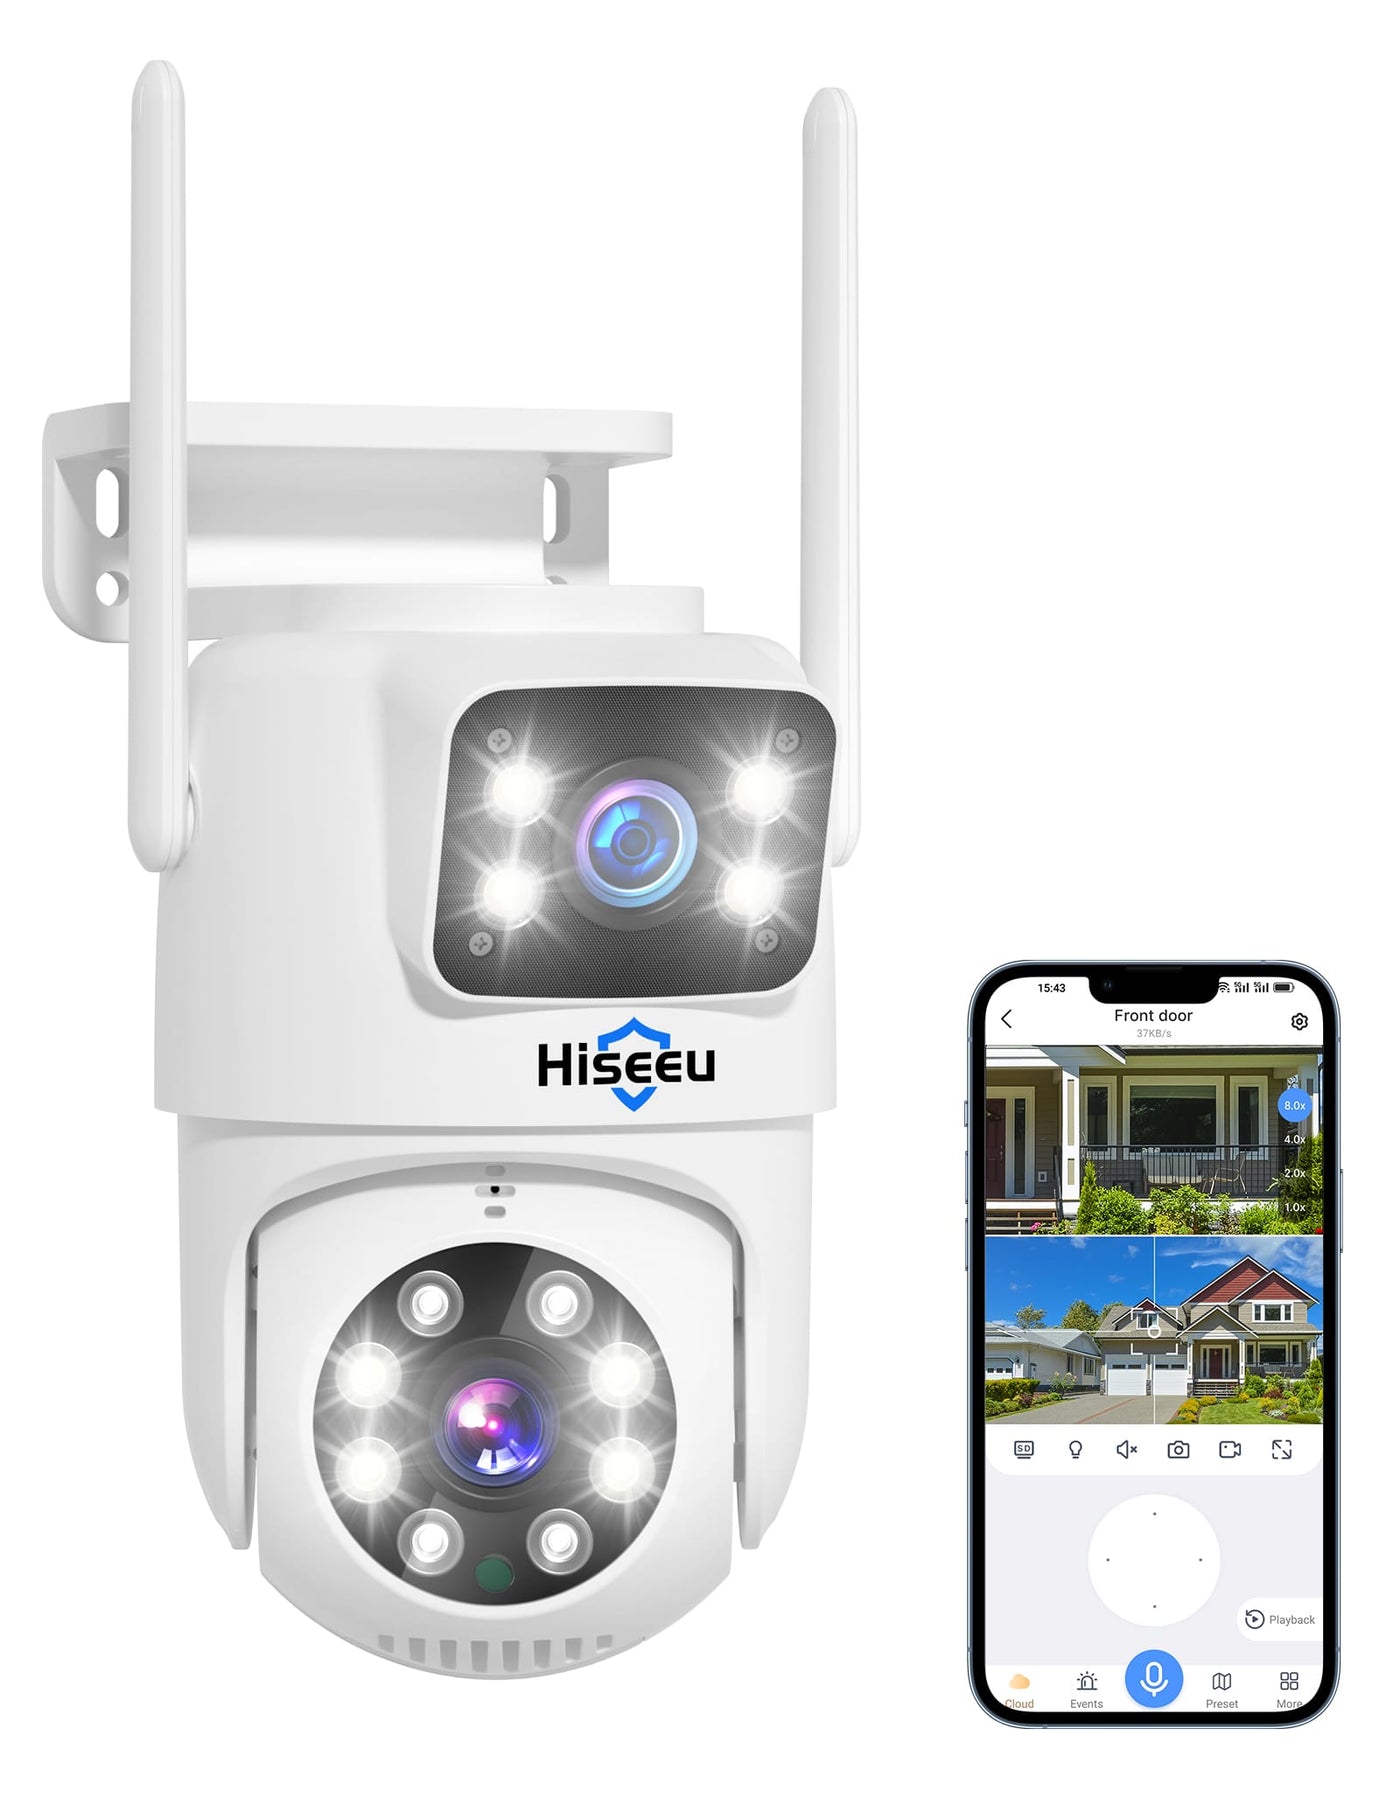 Hiseeu Wireless Security Camera 4MP Dual Lens 5G/2.4G WiFi-Pro Power Cord,IP65 Waterproof Motion Tracking,Color Night Version, No-Monthly Fees Works with Wireless Camera System - Hiseeu